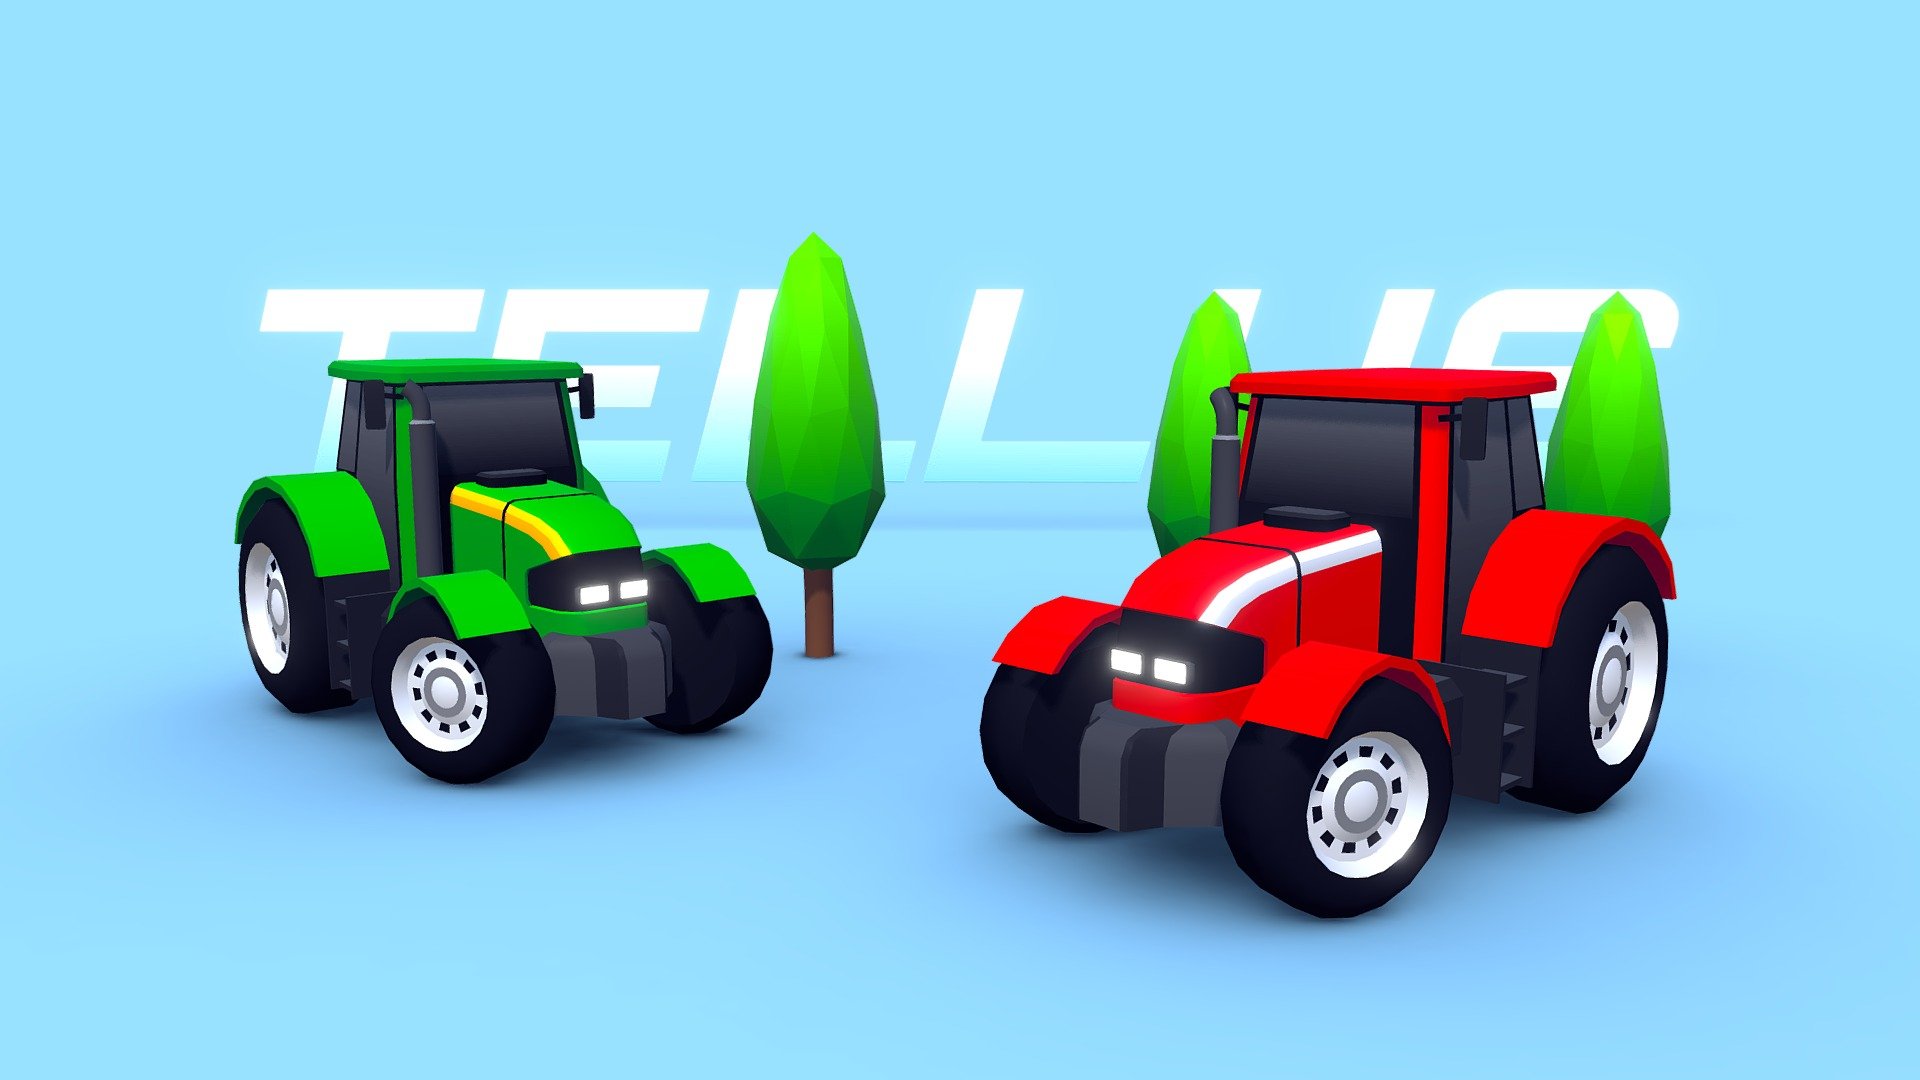 This vehicle can be found in ARCADE: Ultimate Vehicles Pack alongside other 255 vehicles! . This pack is available in Sketchfab, Unity Asset Store and Mena's website (50% OFF for limited time).

Best regards!.

 - ARCADE: "Tellus" Tractor (Farm Machinery) - 3D model by Mena (@MenaStudios) 3d model